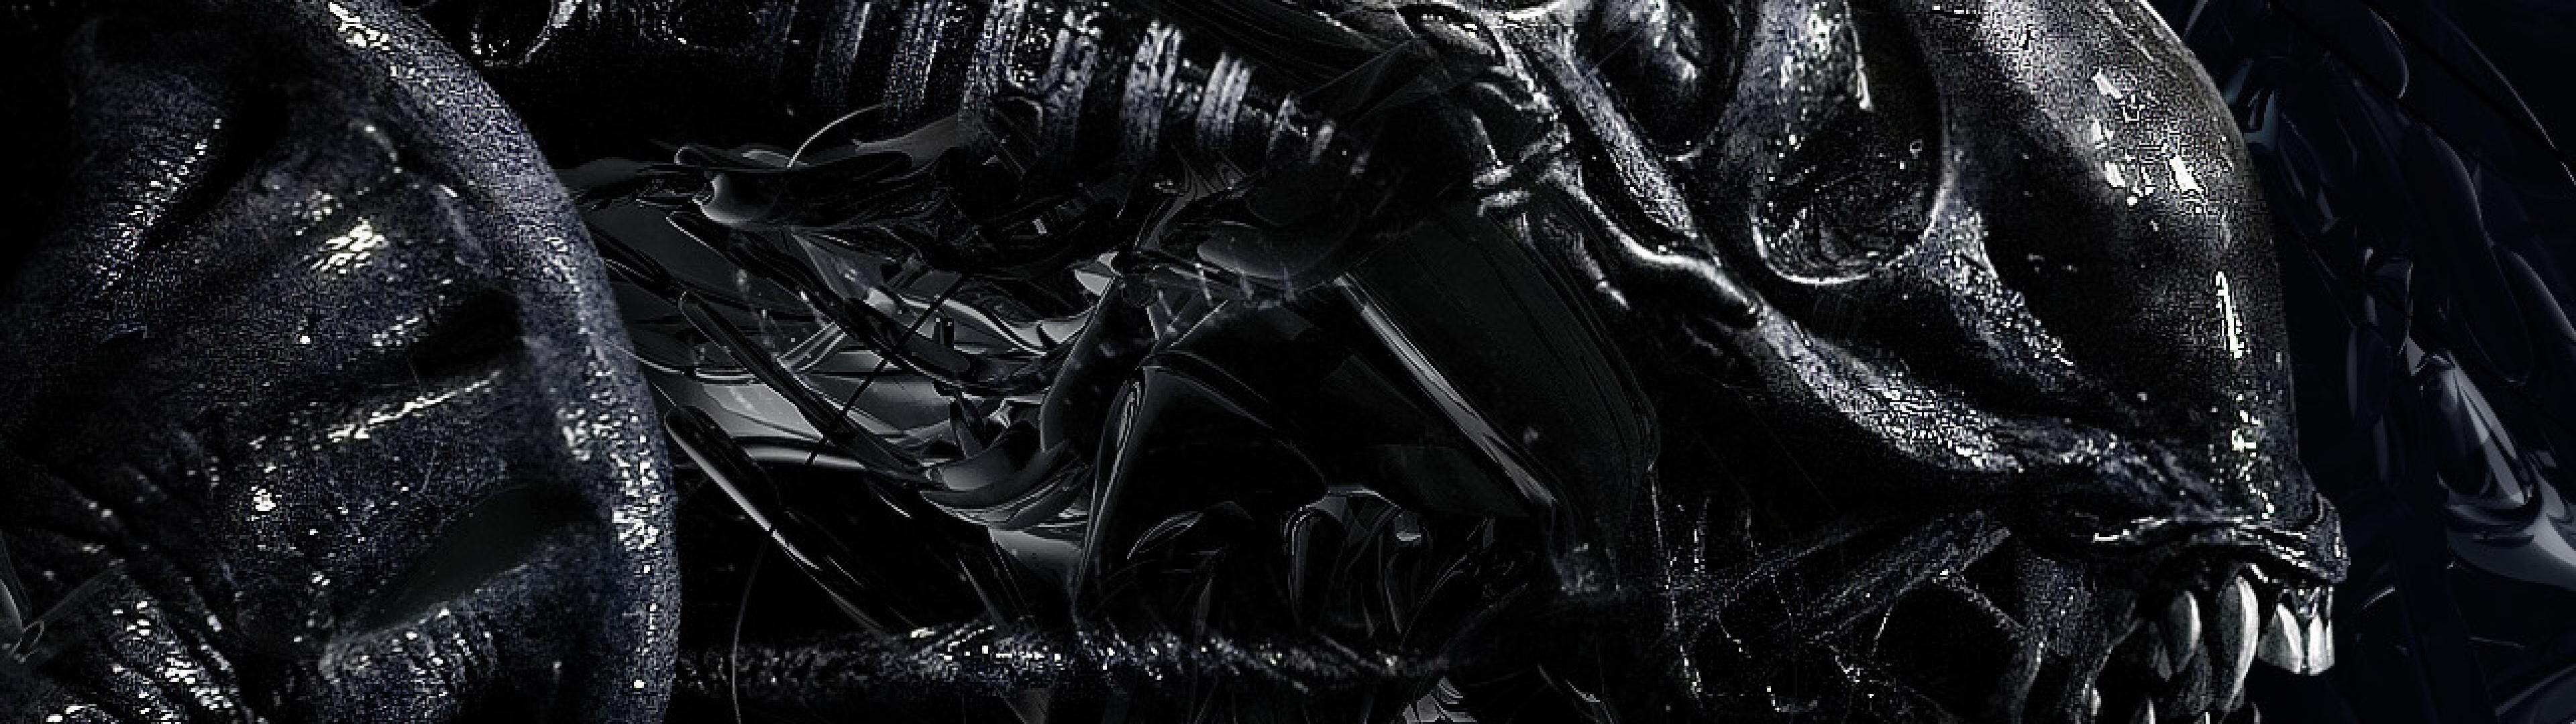 H.R. Giger: Chitin Armor, A Fictional Endoparasitoid Extraterrestrial Species From "Alien" Universe. 3840x1080 Dual Screen Wallpaper.